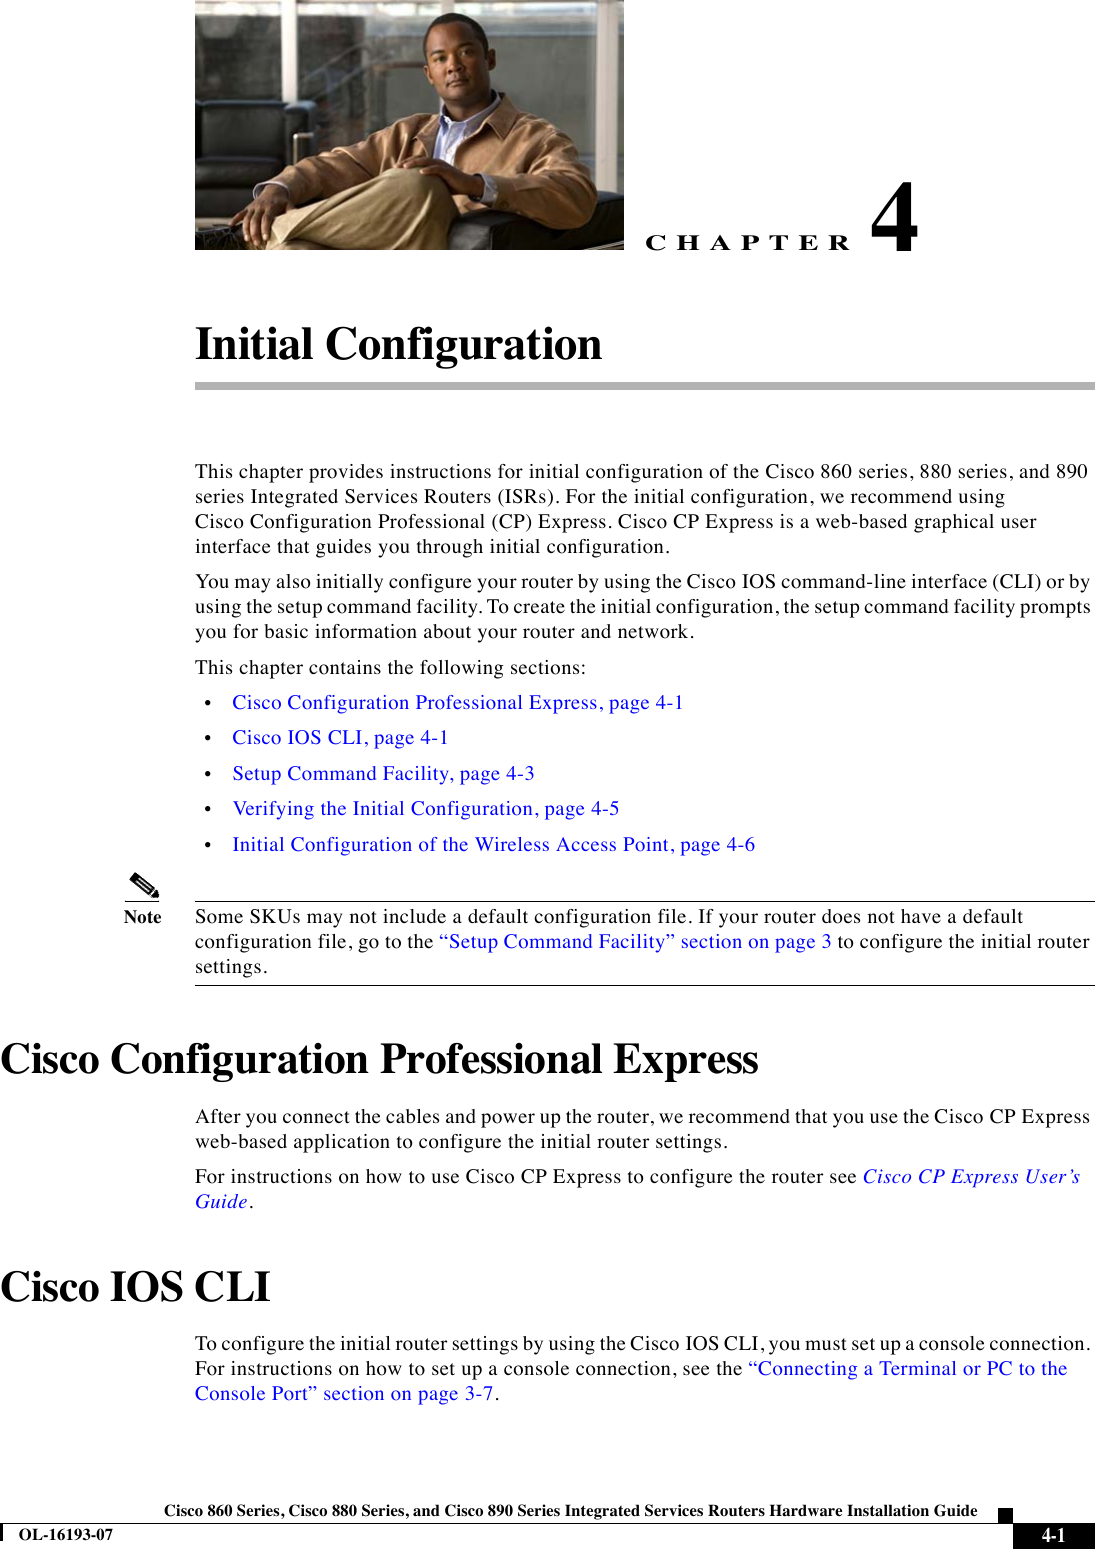 CHAPTER 4-1Cisco 860 Series, Cisco 880 Series, and Cisco 890 Series Integrated Services Routers Hardware Installation GuideOL-16193-074Initial ConfigurationThis chapter provides instructions for initial configuration of the Cisco 860 series, 880 series, and 890 series Integrated Services Routers (ISRs). For the initial configuration, we recommend using Cisco Configuration Professional (CP) Express. Cisco CP Express is a web-based graphical user interface that guides you through initial configuration. You may also initially configure your router by using the Cisco IOS command-line interface (CLI) or by using the setup command facility. To create the initial configuration, the setup command facility prompts you for basic information about your router and network. This chapter contains the following sections:  •Cisco Configuration Professional Express, page 4-1  •Cisco IOS CLI, page 4-1  •Setup Command Facility, page 4-3  •Verifying the Initial Configuration, page 4-5  •Initial Configuration of the Wireless Access Point, page 4-6NoteSome SKUs may not include a default configuration file. If your router does not have a default configuration file, go to the “Setup Command Facility” section on page 3 to configure the initial router settings.Cisco Configuration Professional ExpressAfter you connect the cables and power up the router, we recommend that you use the Cisco CP Express web-based application to configure the initial router settings.For instructions on how to use Cisco CP Express to configure the router see Cisco CP Express User’s Guide.Cisco IOS CLITo configure the initial router settings by using the Cisco IOS CLI, you must set up a console connection. For instructions on how to set up a console connection, see the “Connecting a Terminal or PC to the Console Port” section on page 3-7.